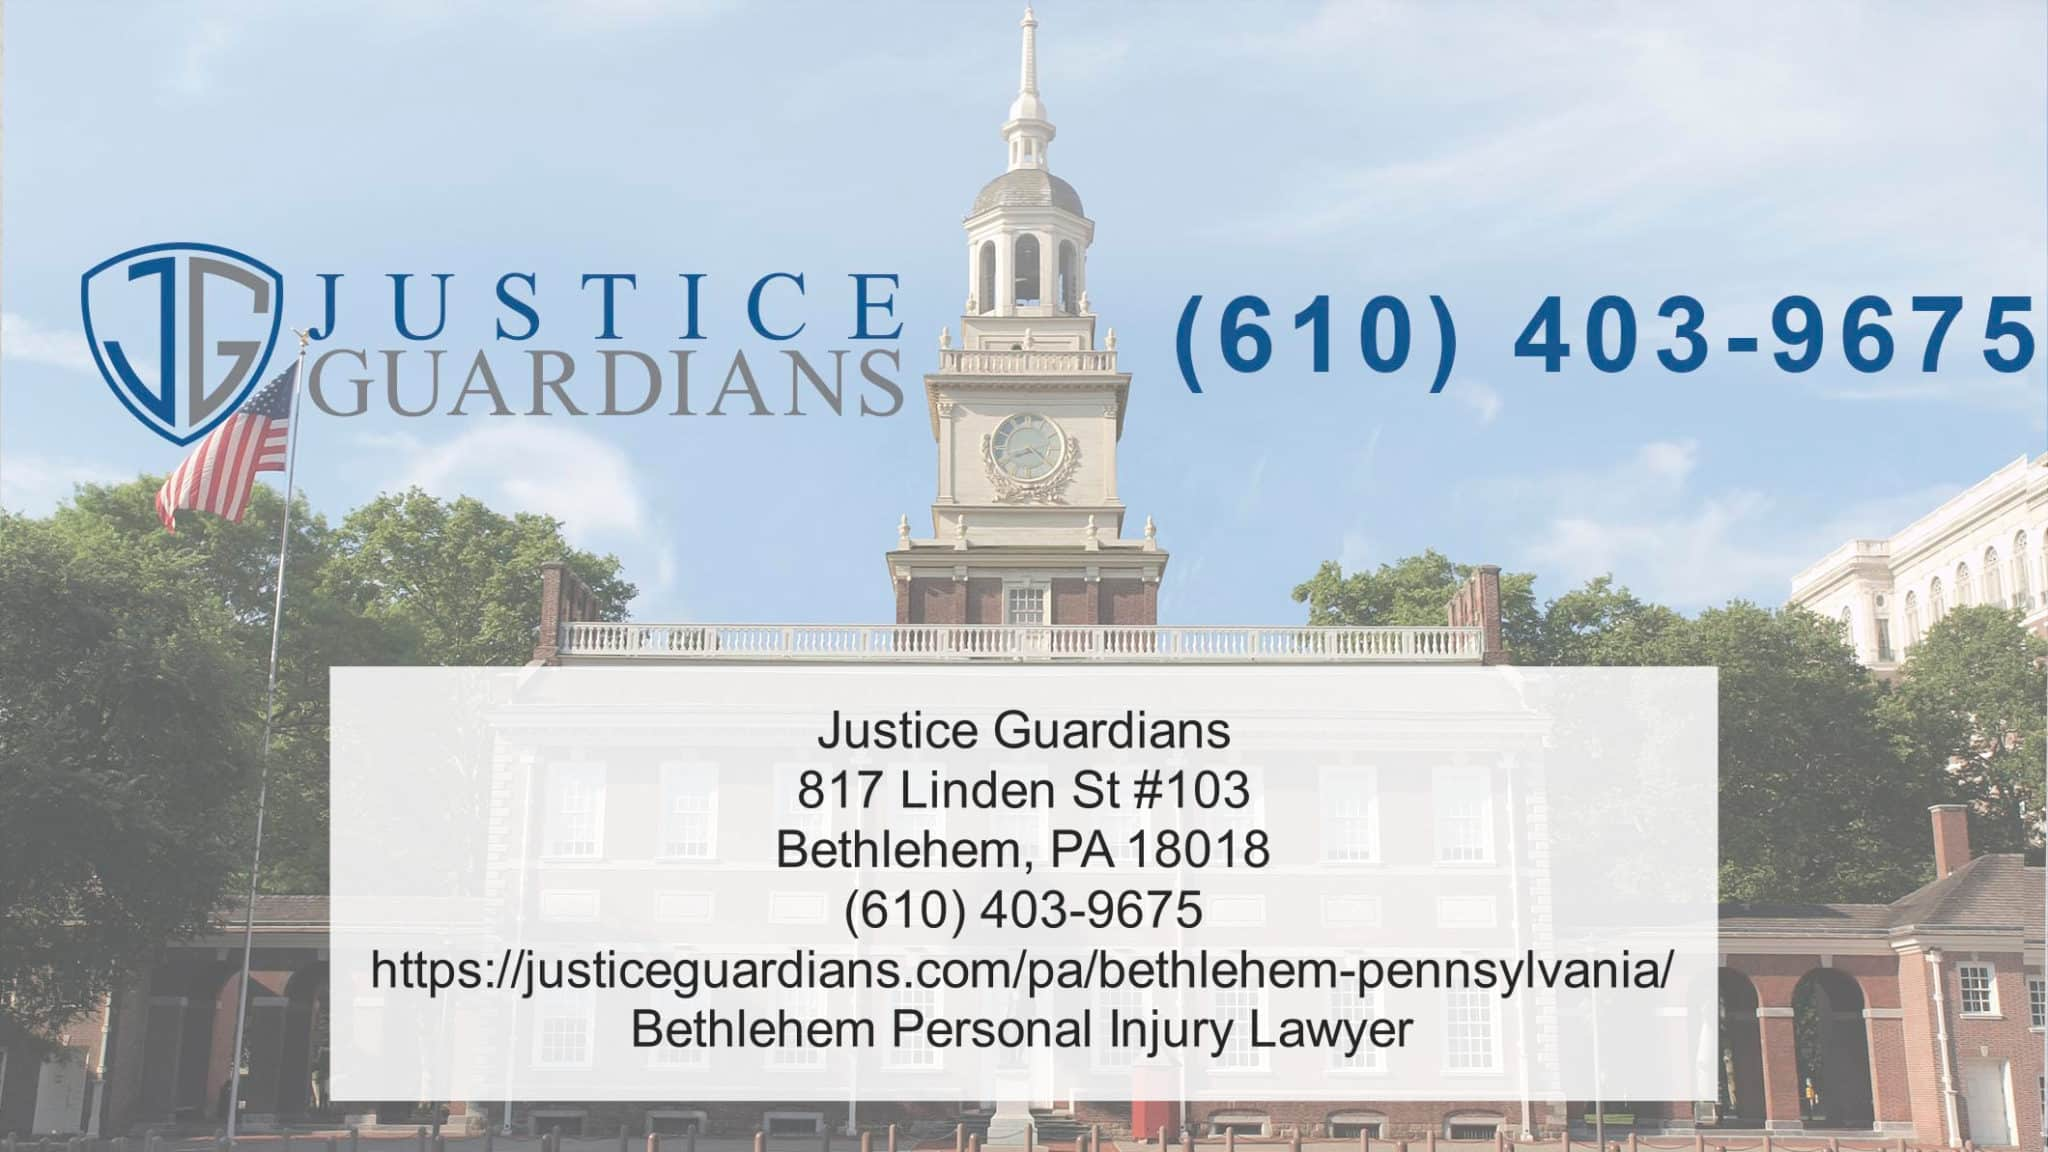 Get Worker Compensation For Workplace Injuries With This Bethlehem, PA Law Firm